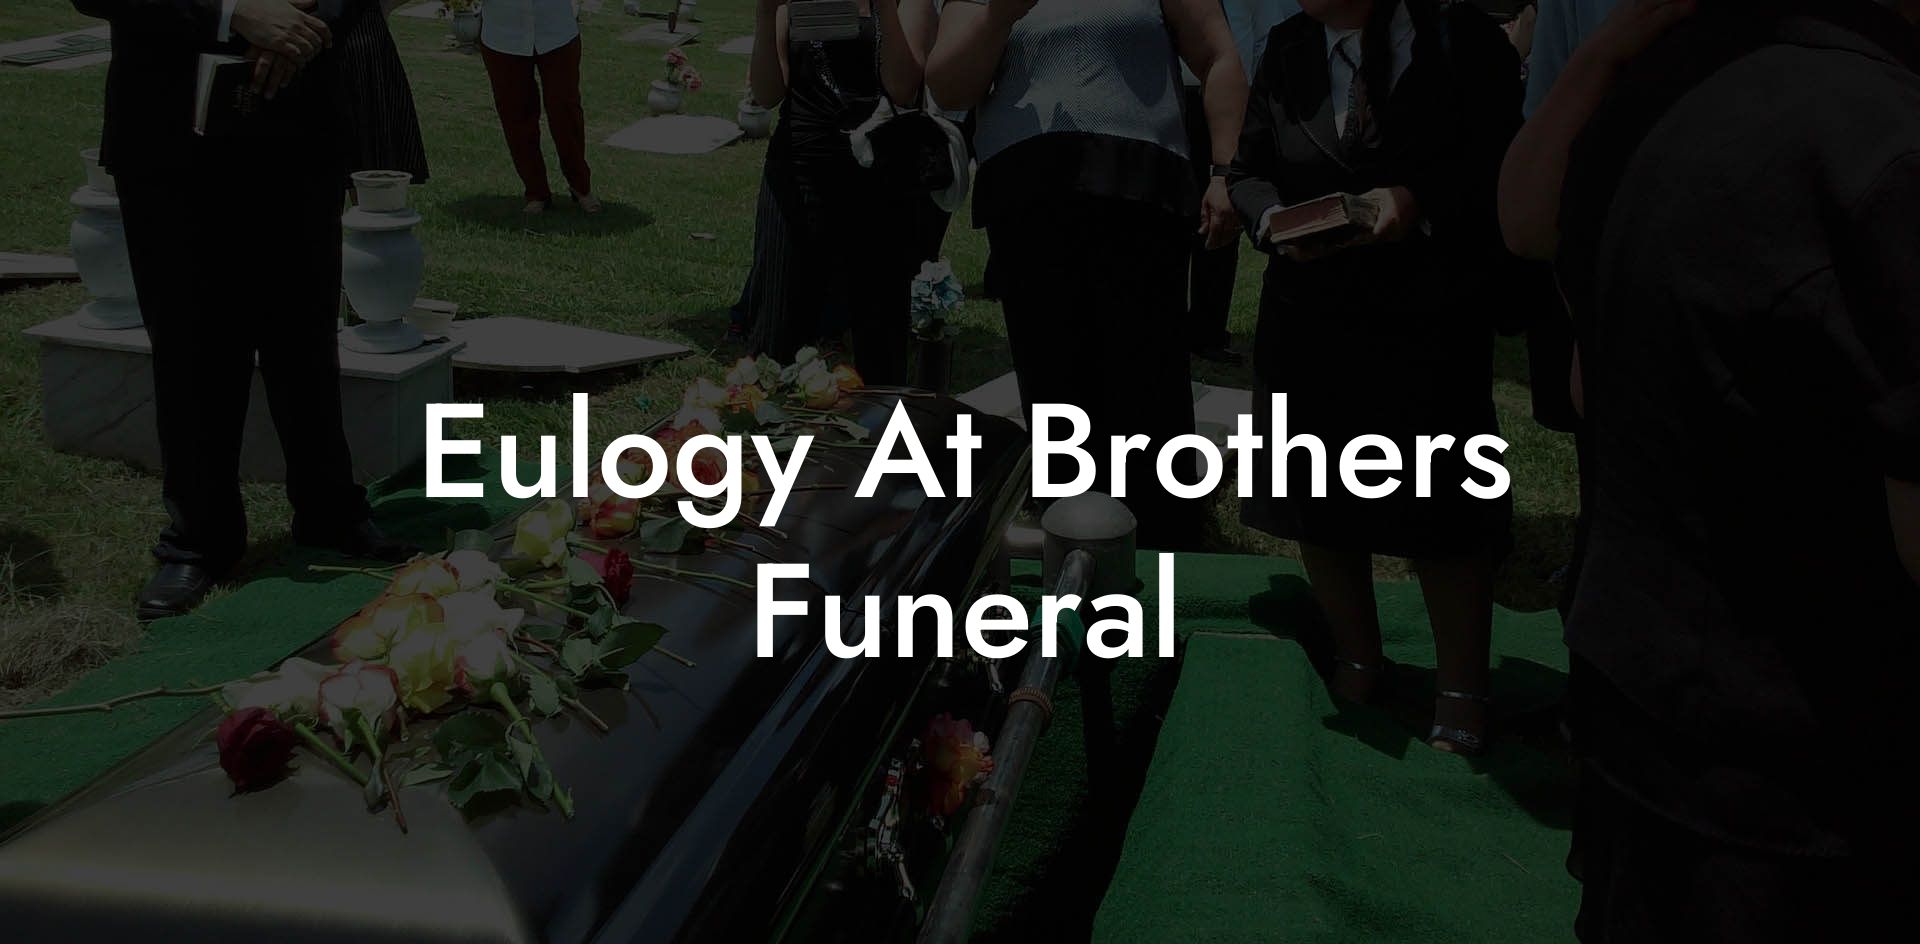 Eulogy At Brothers Funeral